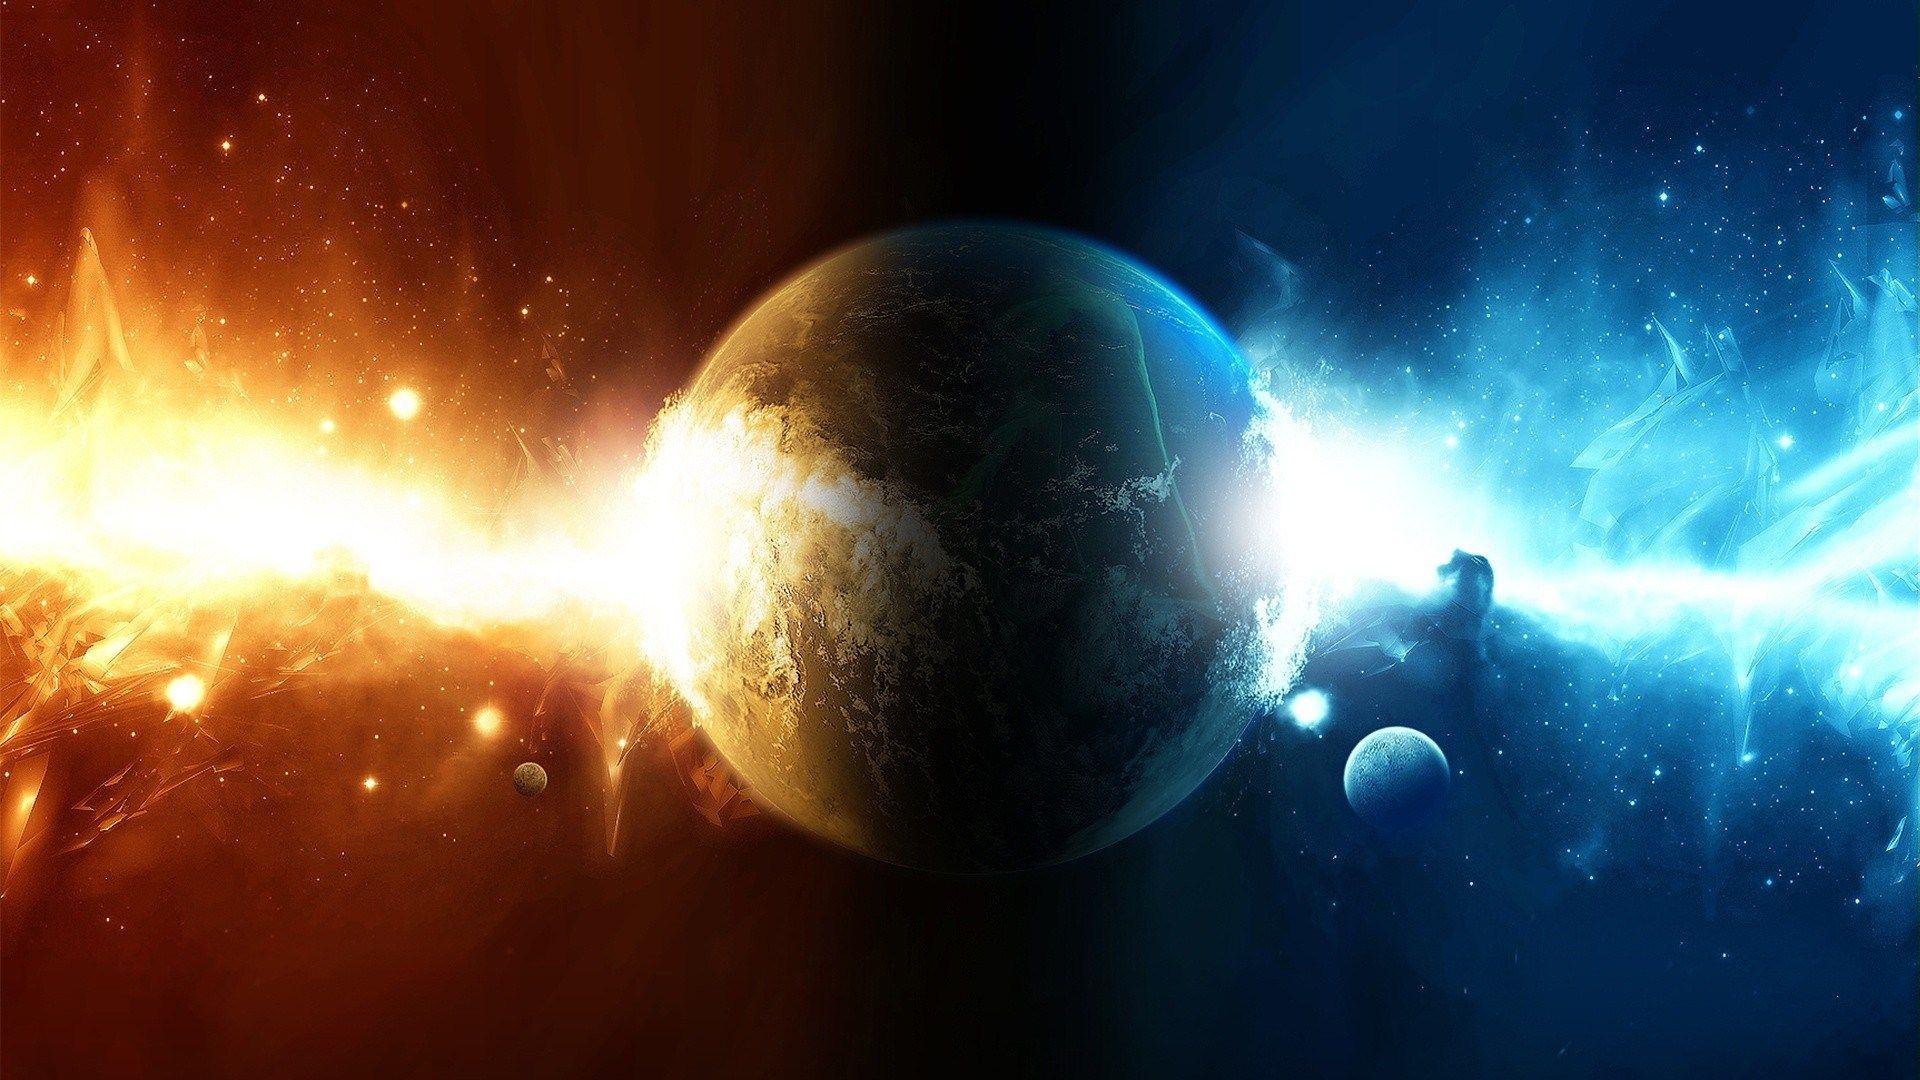 Cool Planet Background Wallpaper Full HD Pics Background Widescreen